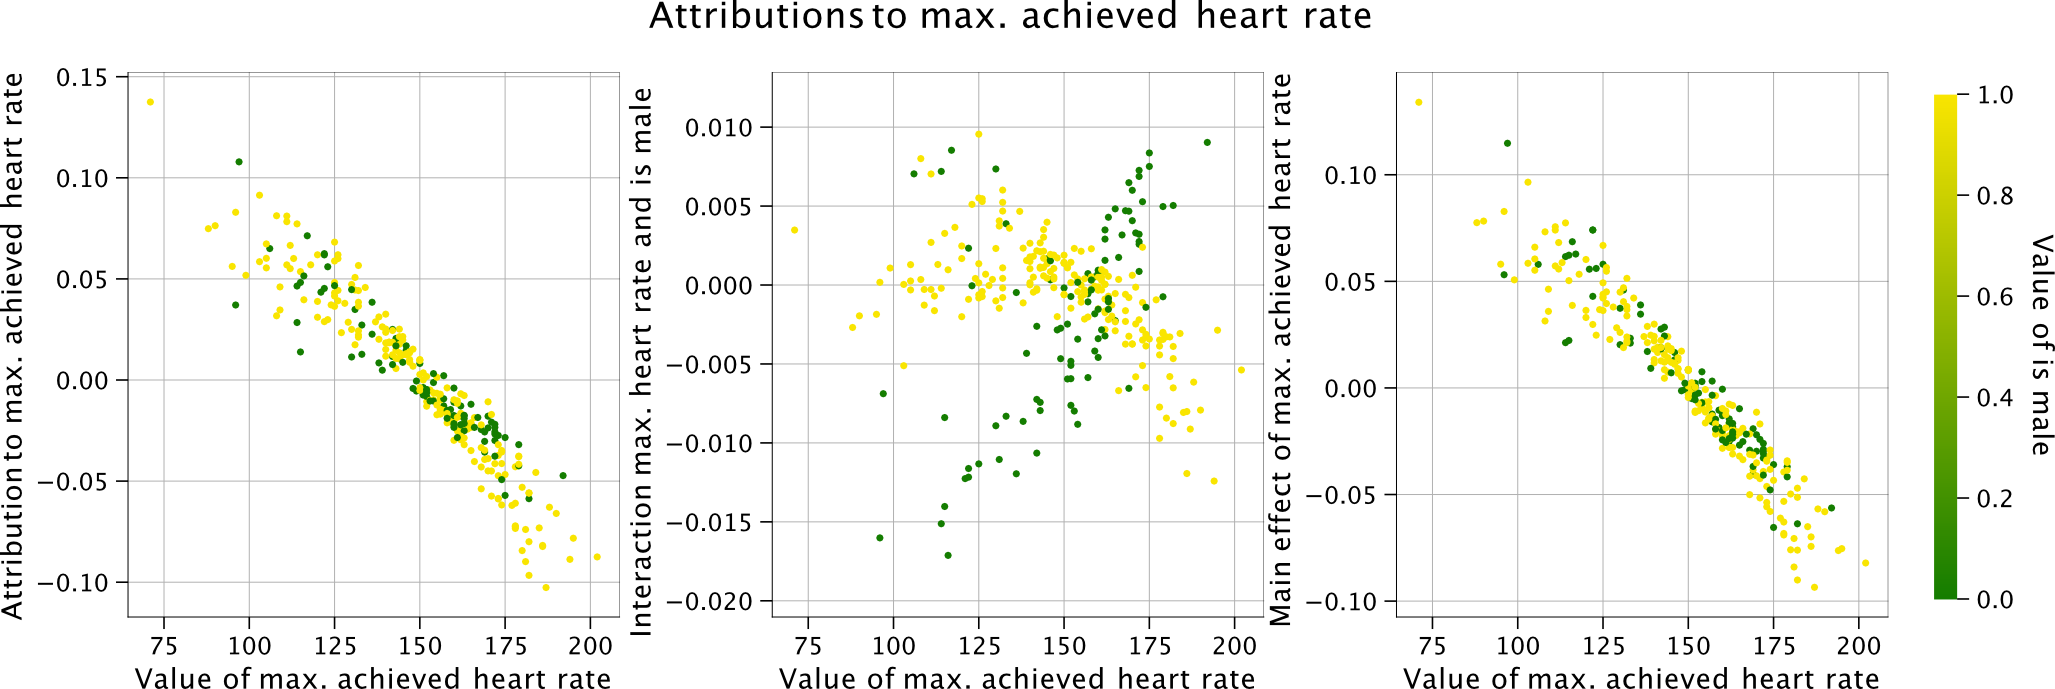 Interaction: Heart Rate and Gender